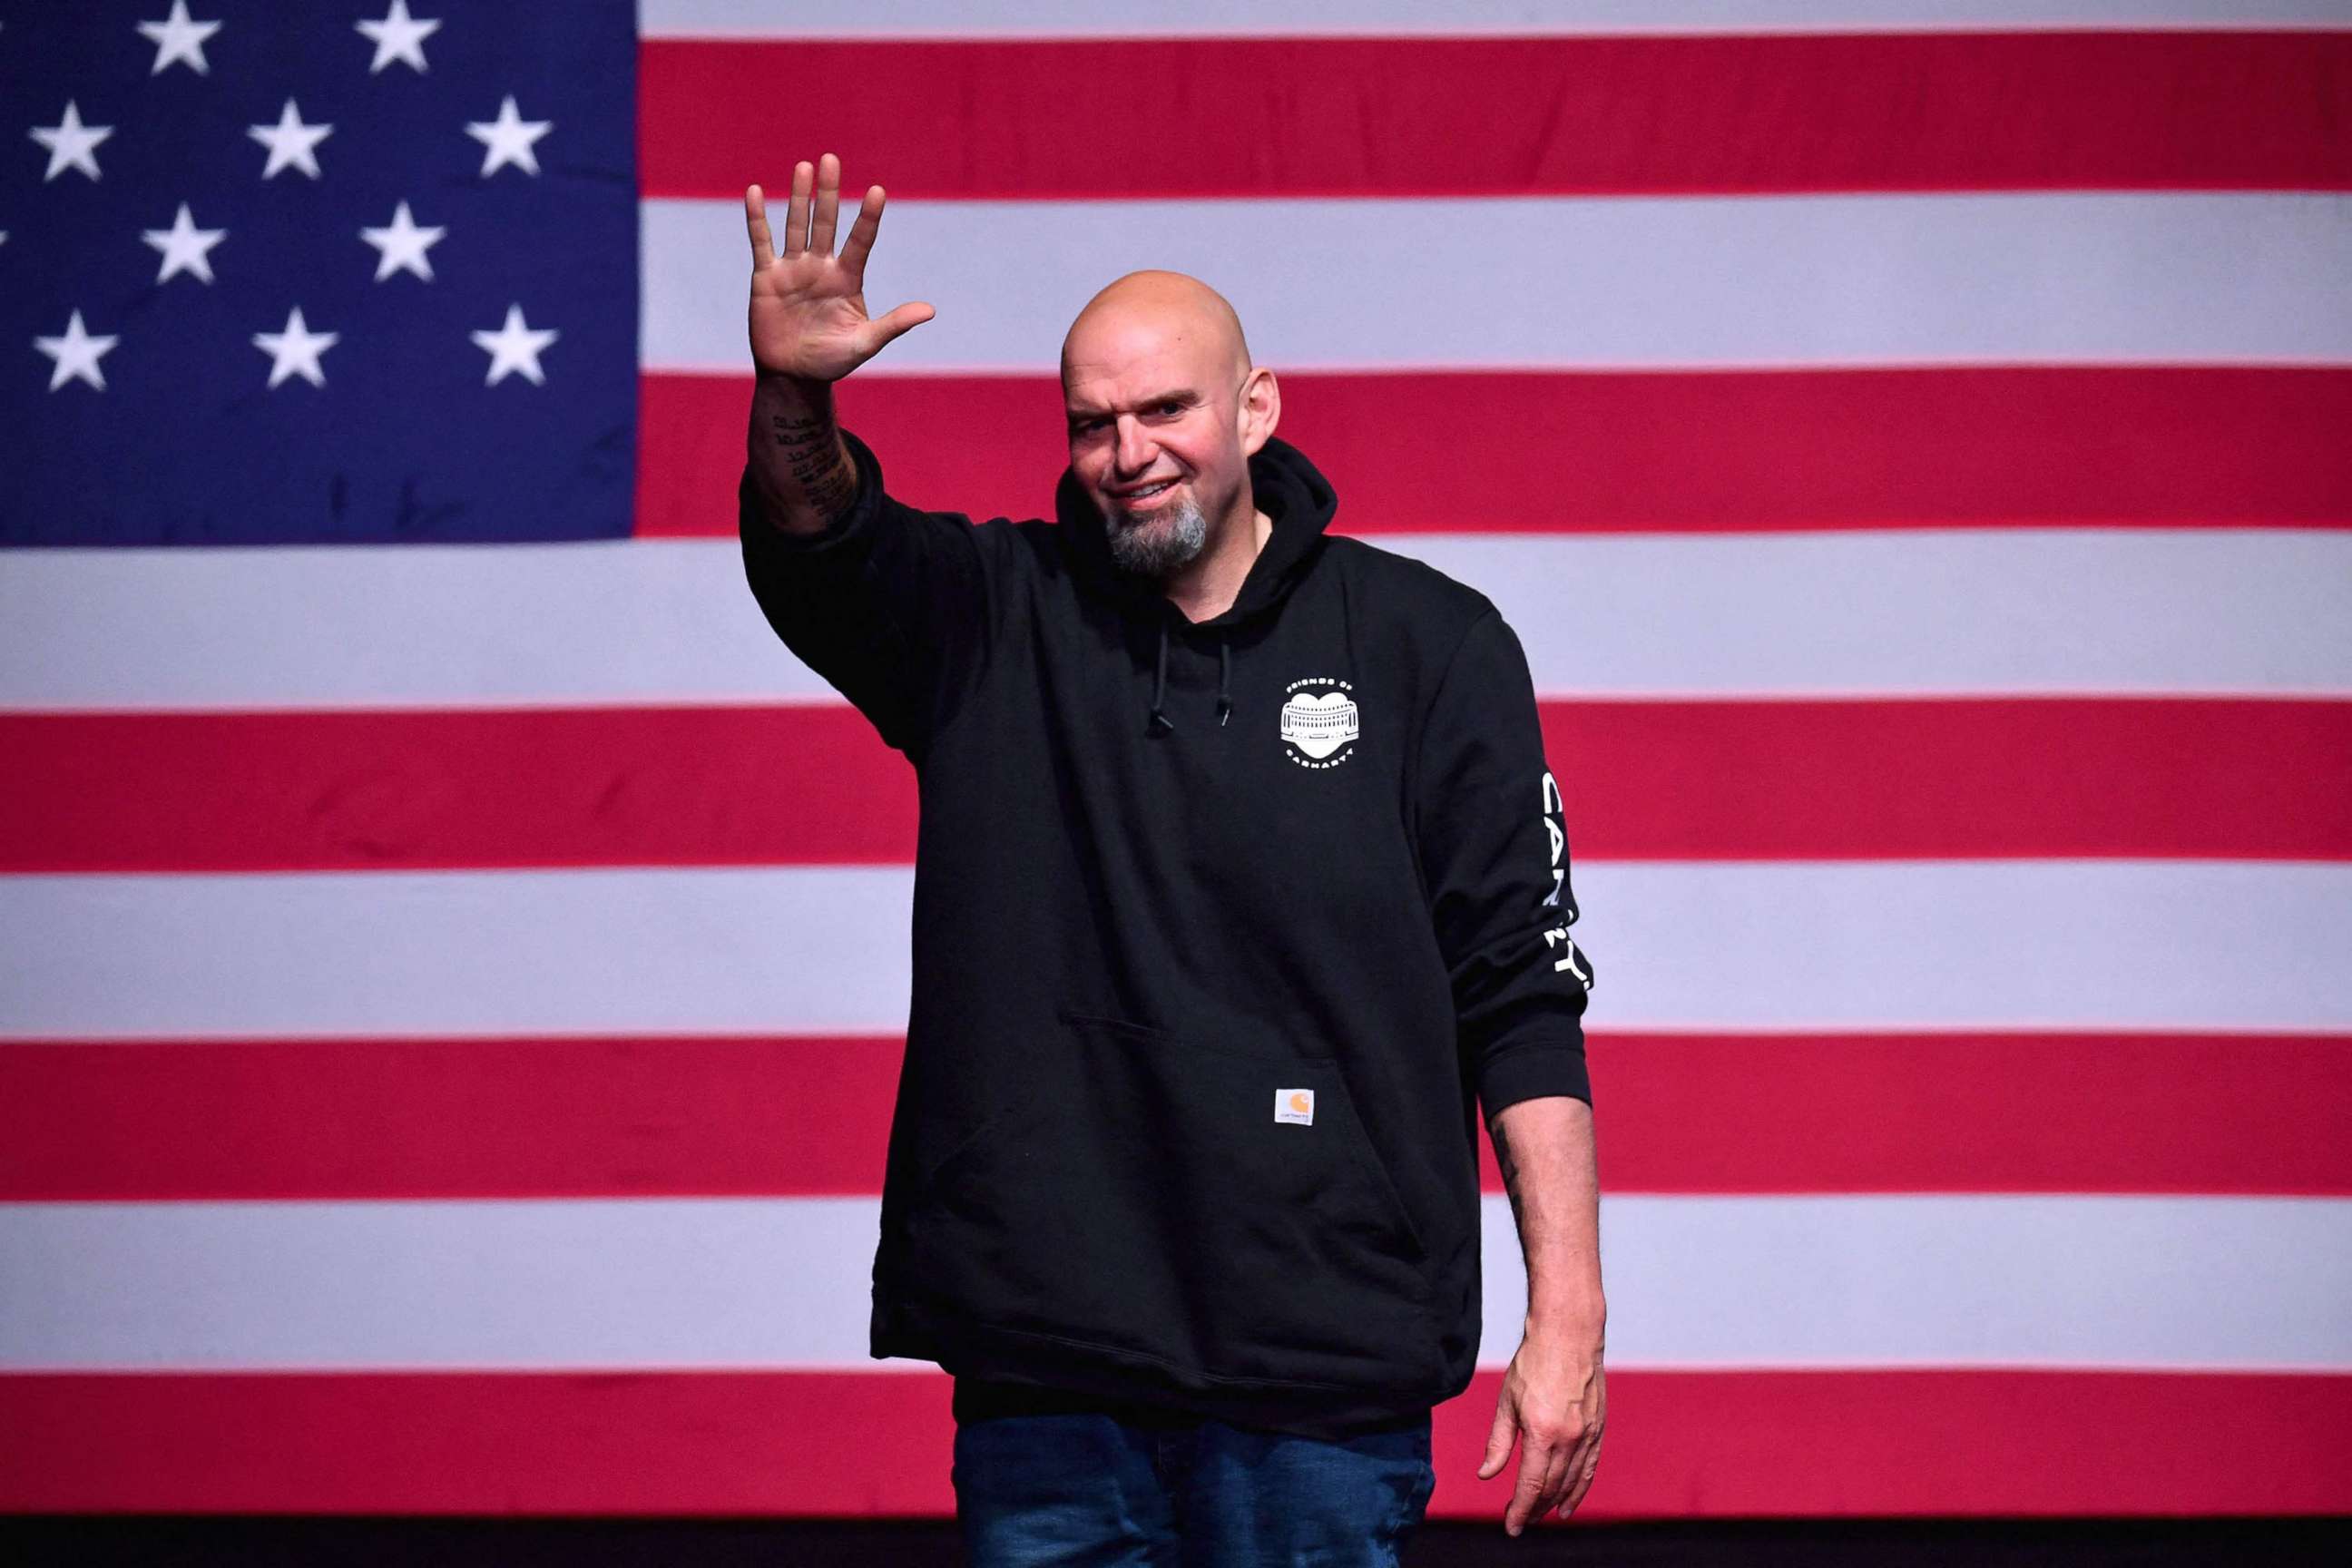 PHOTO: Pennsylvania Democratic Senatorial candidate John Fetterman waves onstage at a watch party during the midterm elections at Stage AE in Pittsburgh, PA, on Nov 8, 2022.